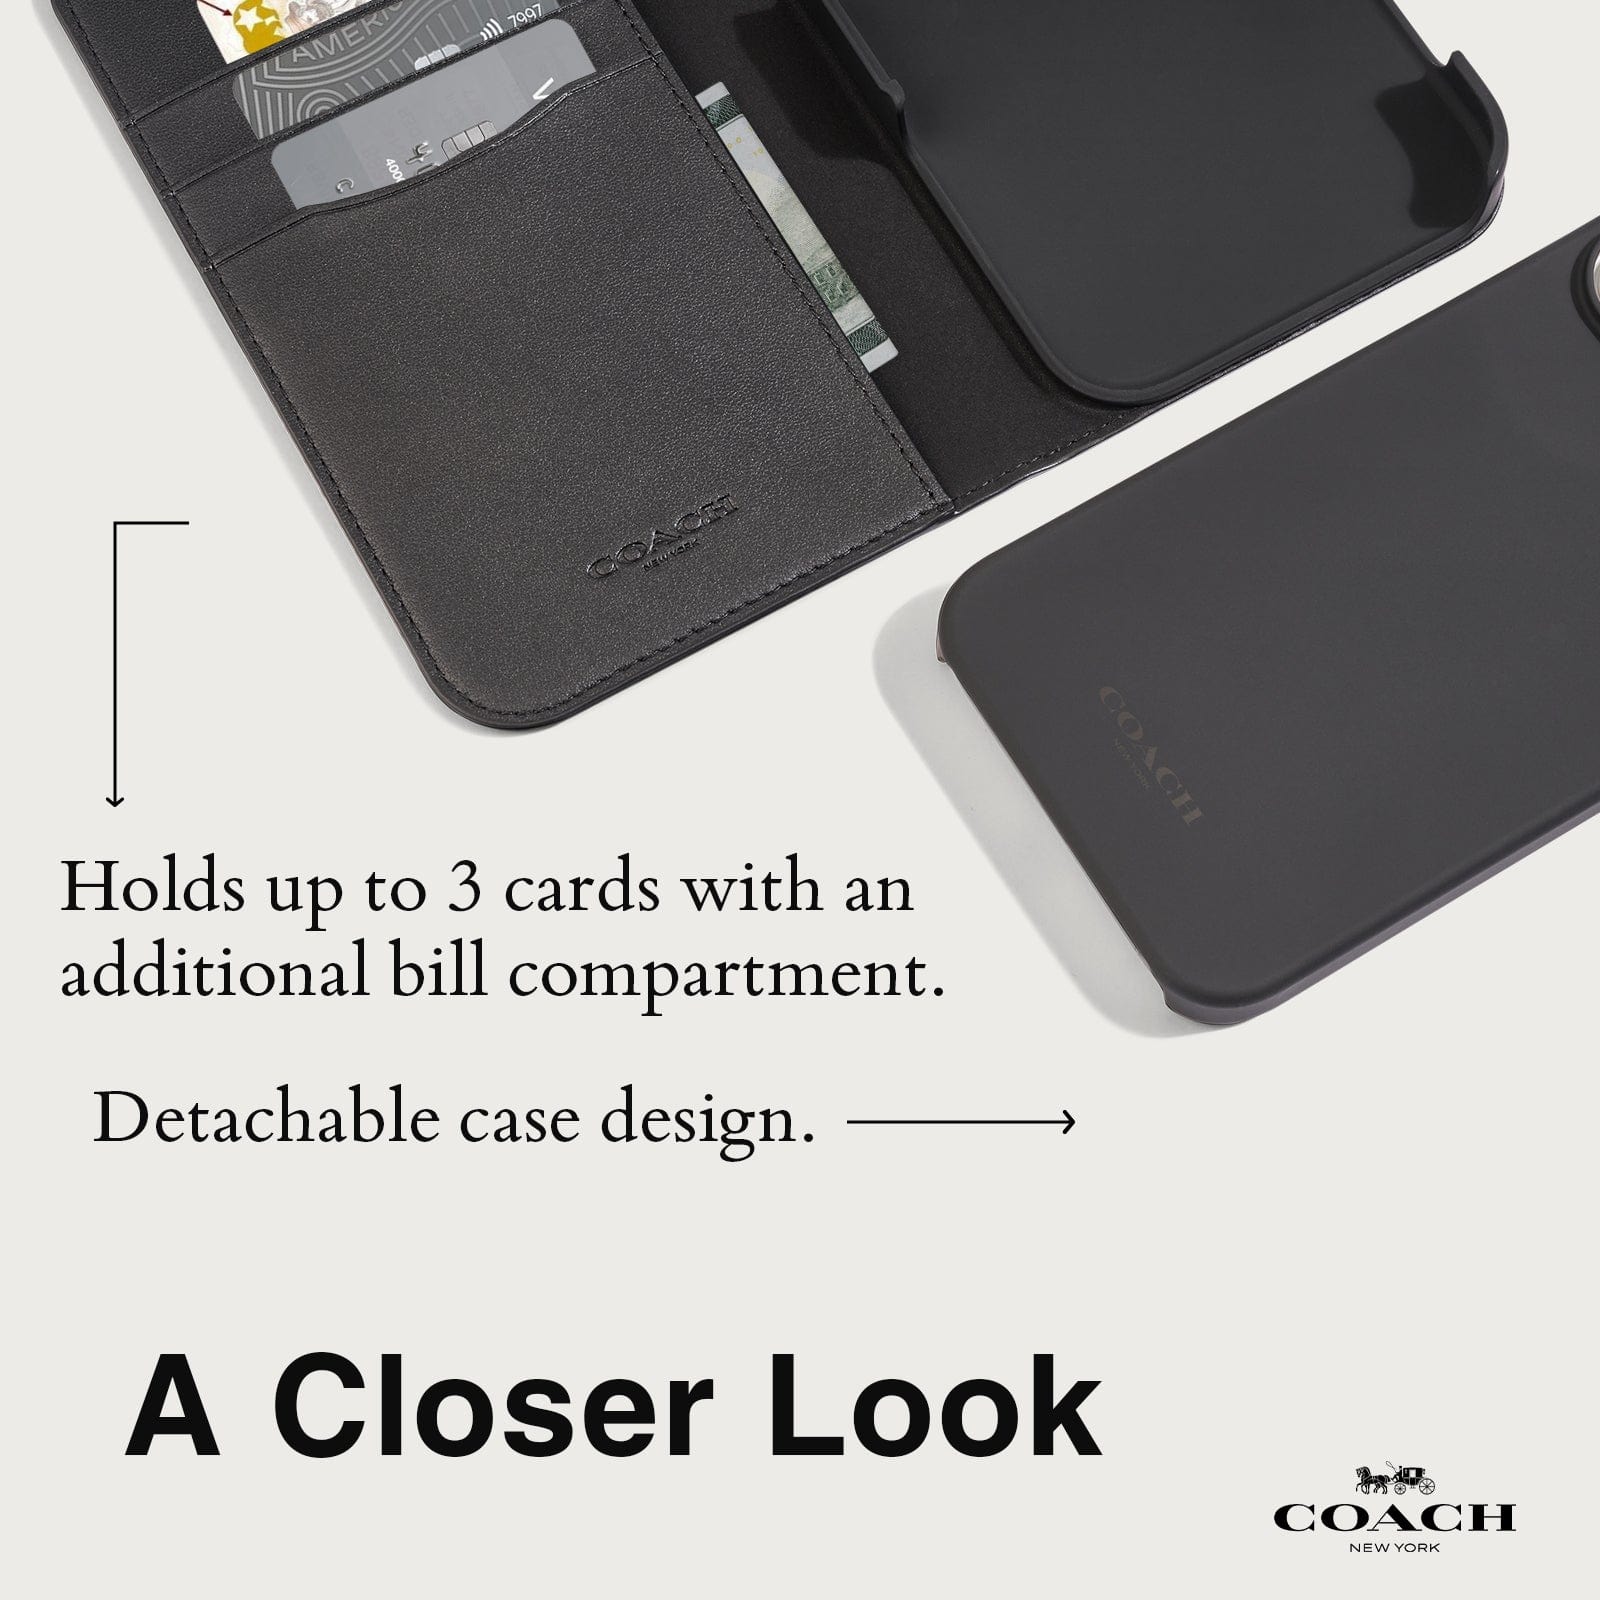 HOLDS UP TO 3 CARDS WITH AN ADDITIONAL BILL COMPARTMENT. DETACHABLE CASE DESIGN. A CLOSER LOOK